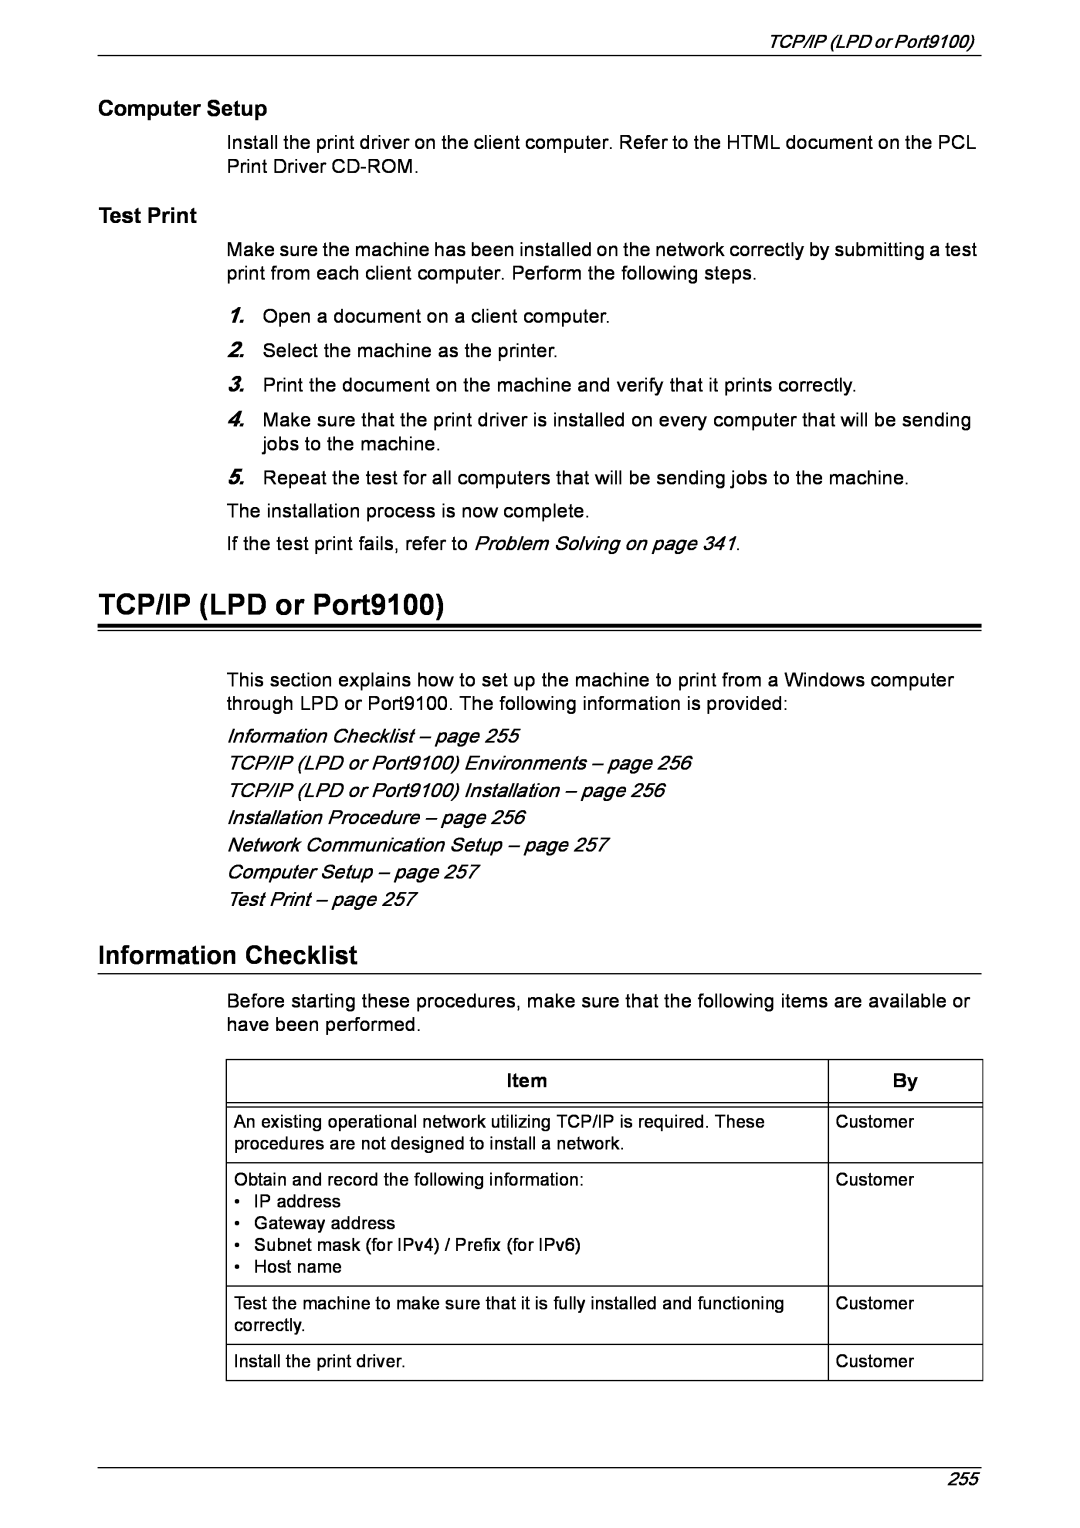 Xerox 5222 Information Checklist – page, TCP/IP LPD or Port9100 Environments – page, Installation Procedure – page 